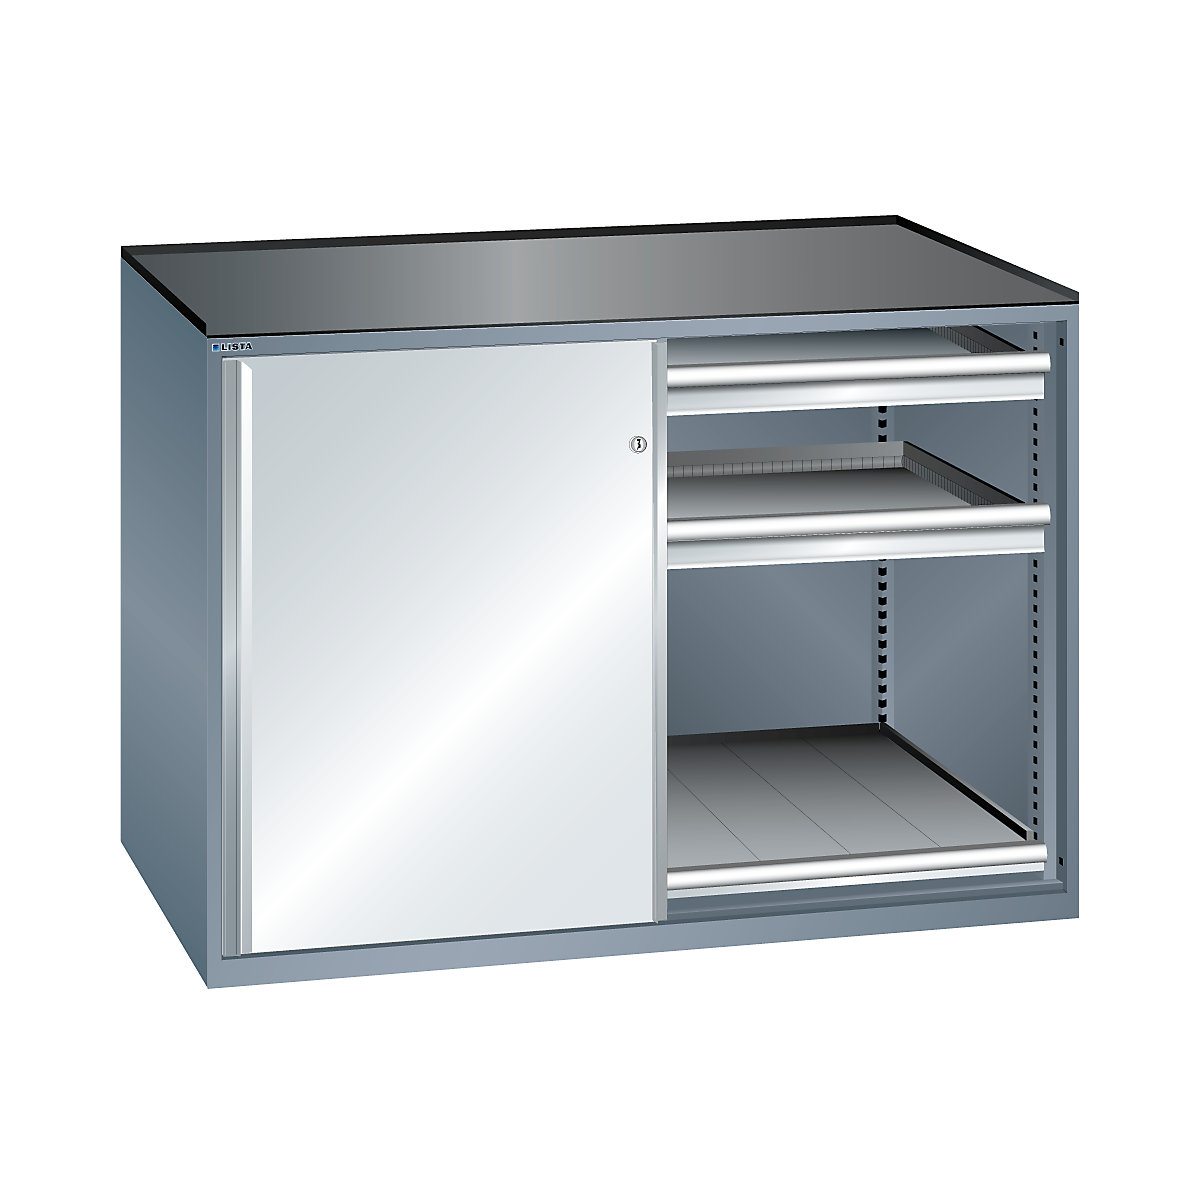 Sliding door cupboard, max. load of pull-out shelf 200 kg – LISTA, 4 drawers, 2 pull-out shelves, grey metallic / light grey-4